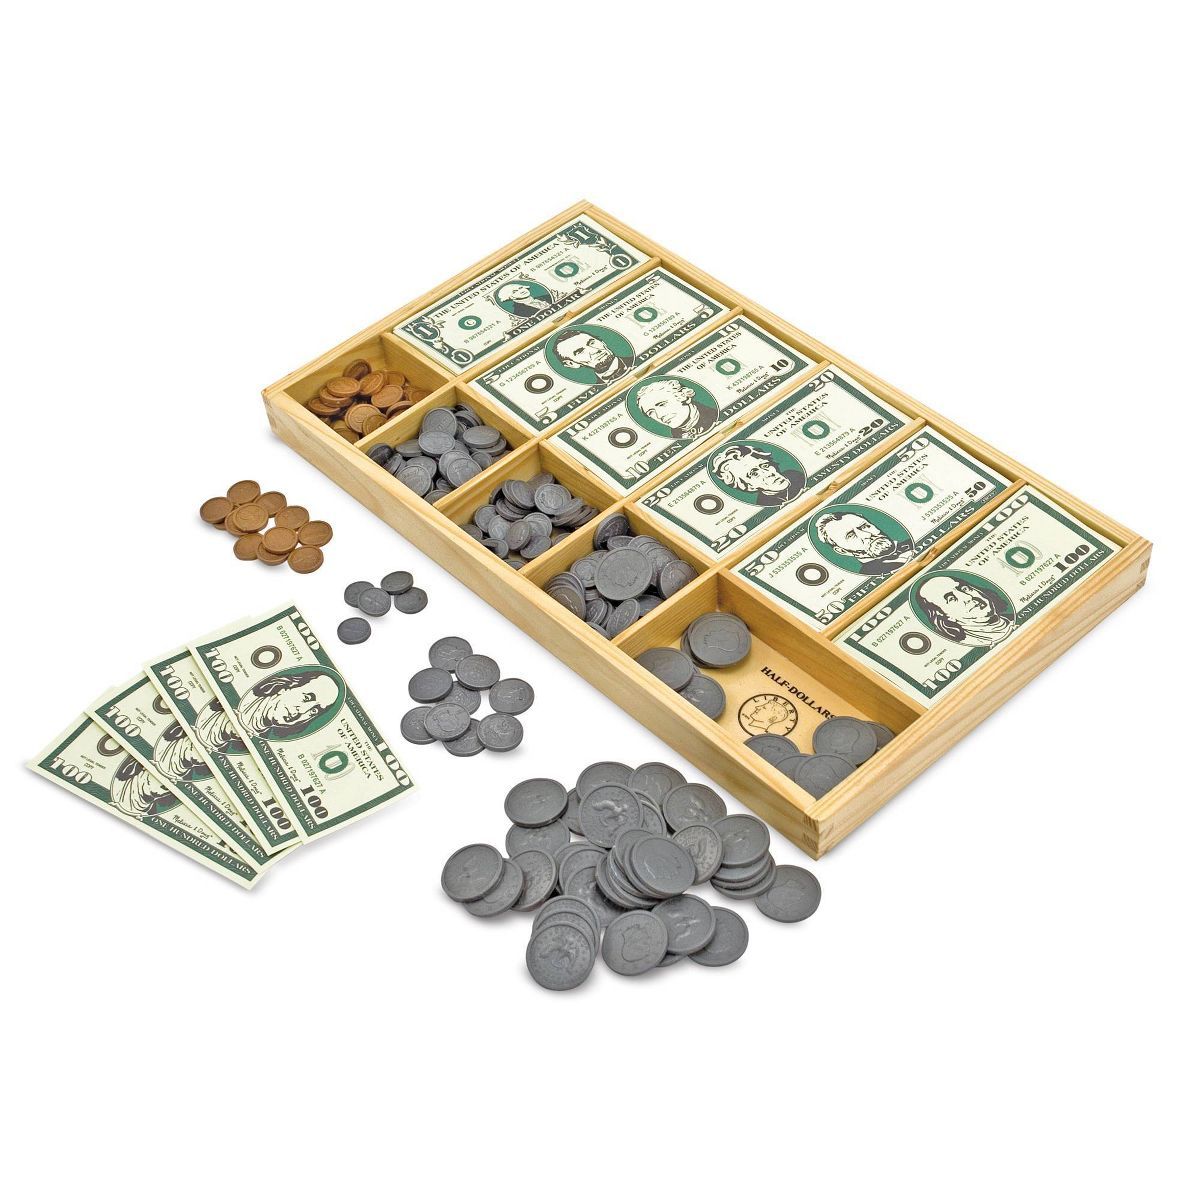 Melissa & Doug Play Money Set - Educational Toy With Paper Bills and Plastic Coins (50 of each de... | Target